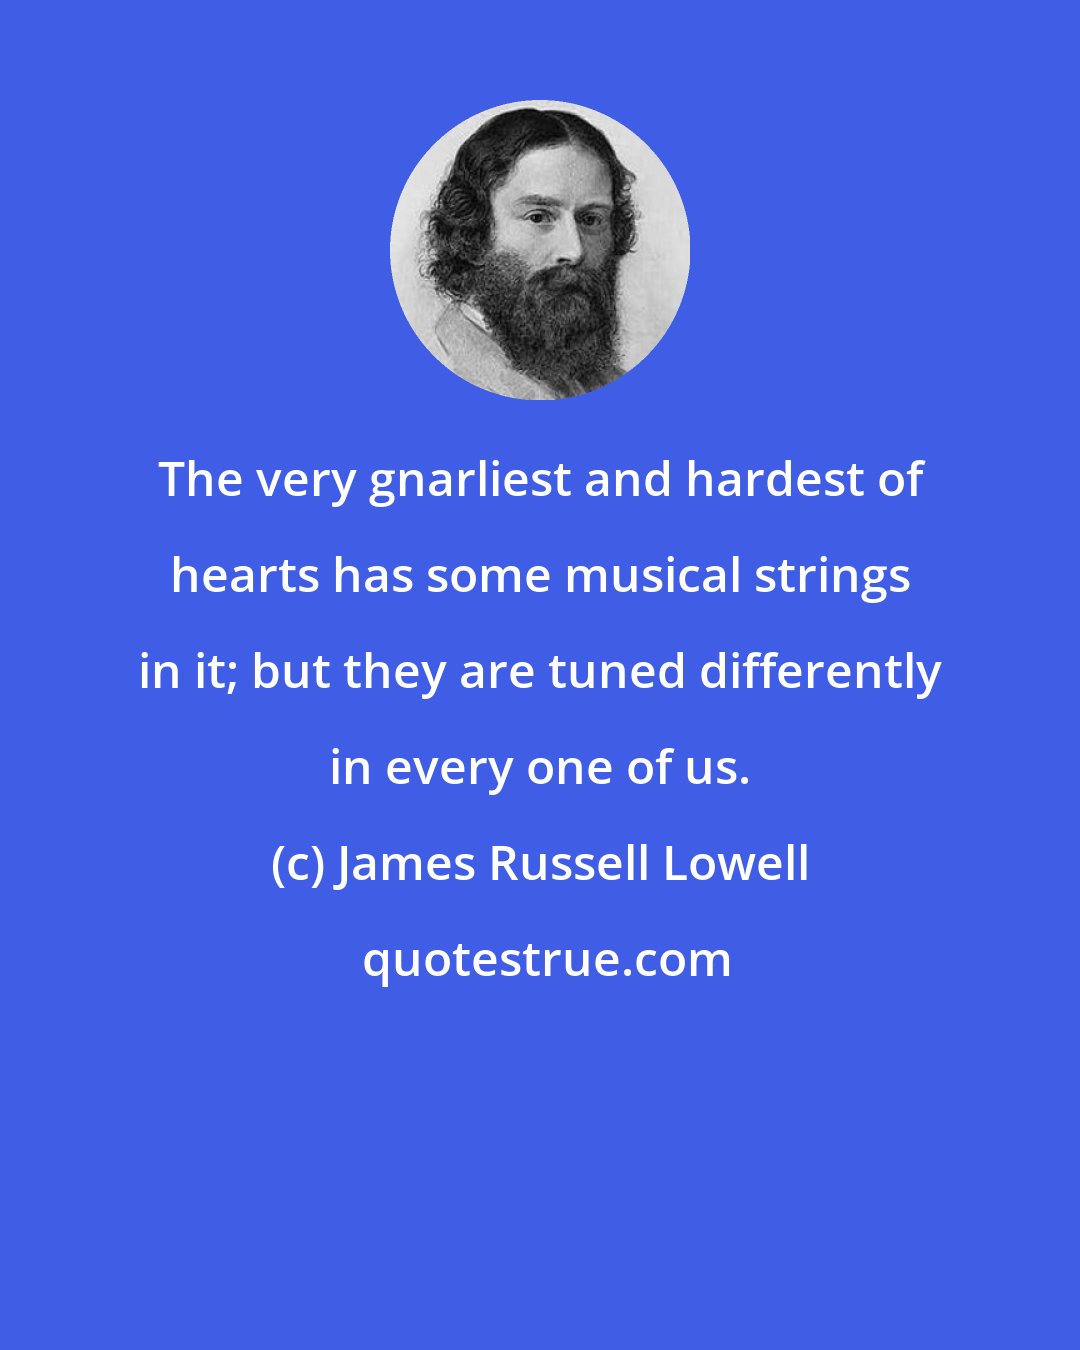 James Russell Lowell: The very gnarliest and hardest of hearts has some musical strings in it; but they are tuned differently in every one of us.